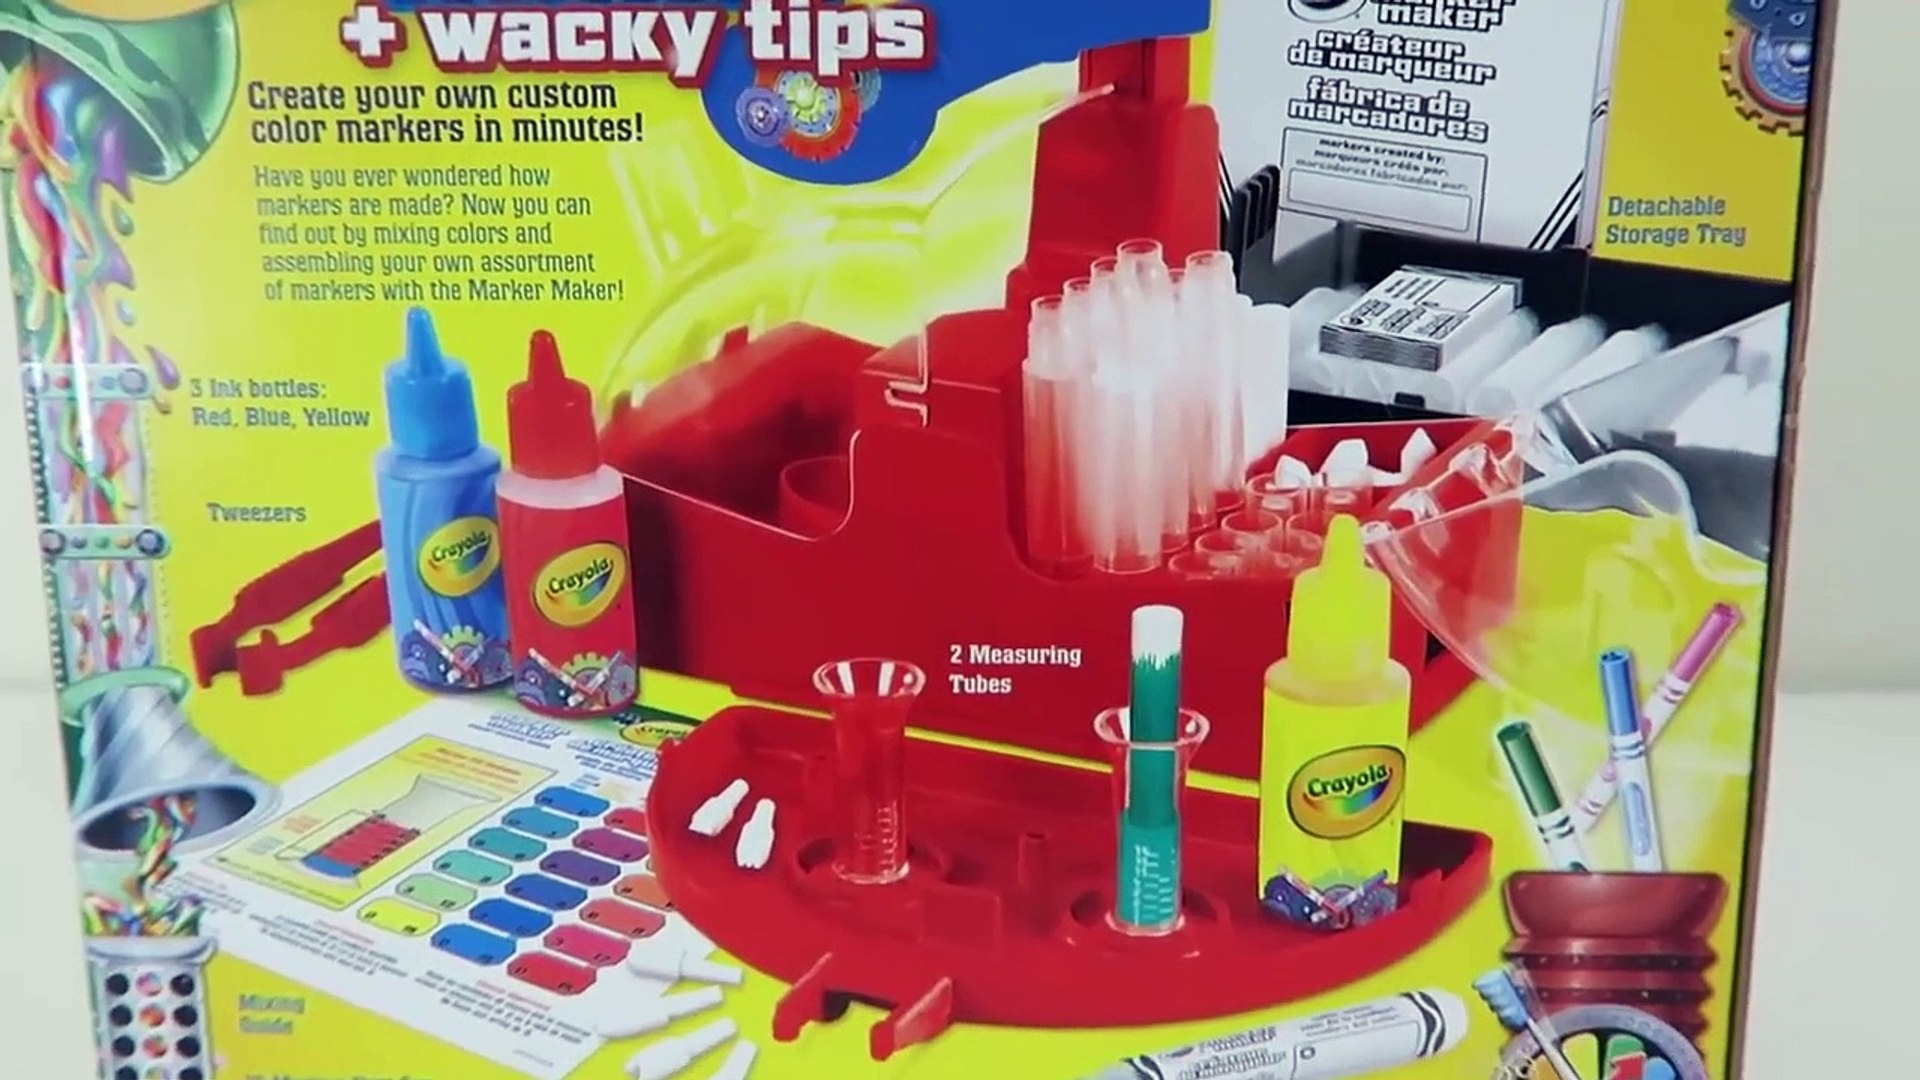  Crayola Marker Maker Wacky Tips Only $7.55 (Reg. $34.99) -  Couponing with Rachel